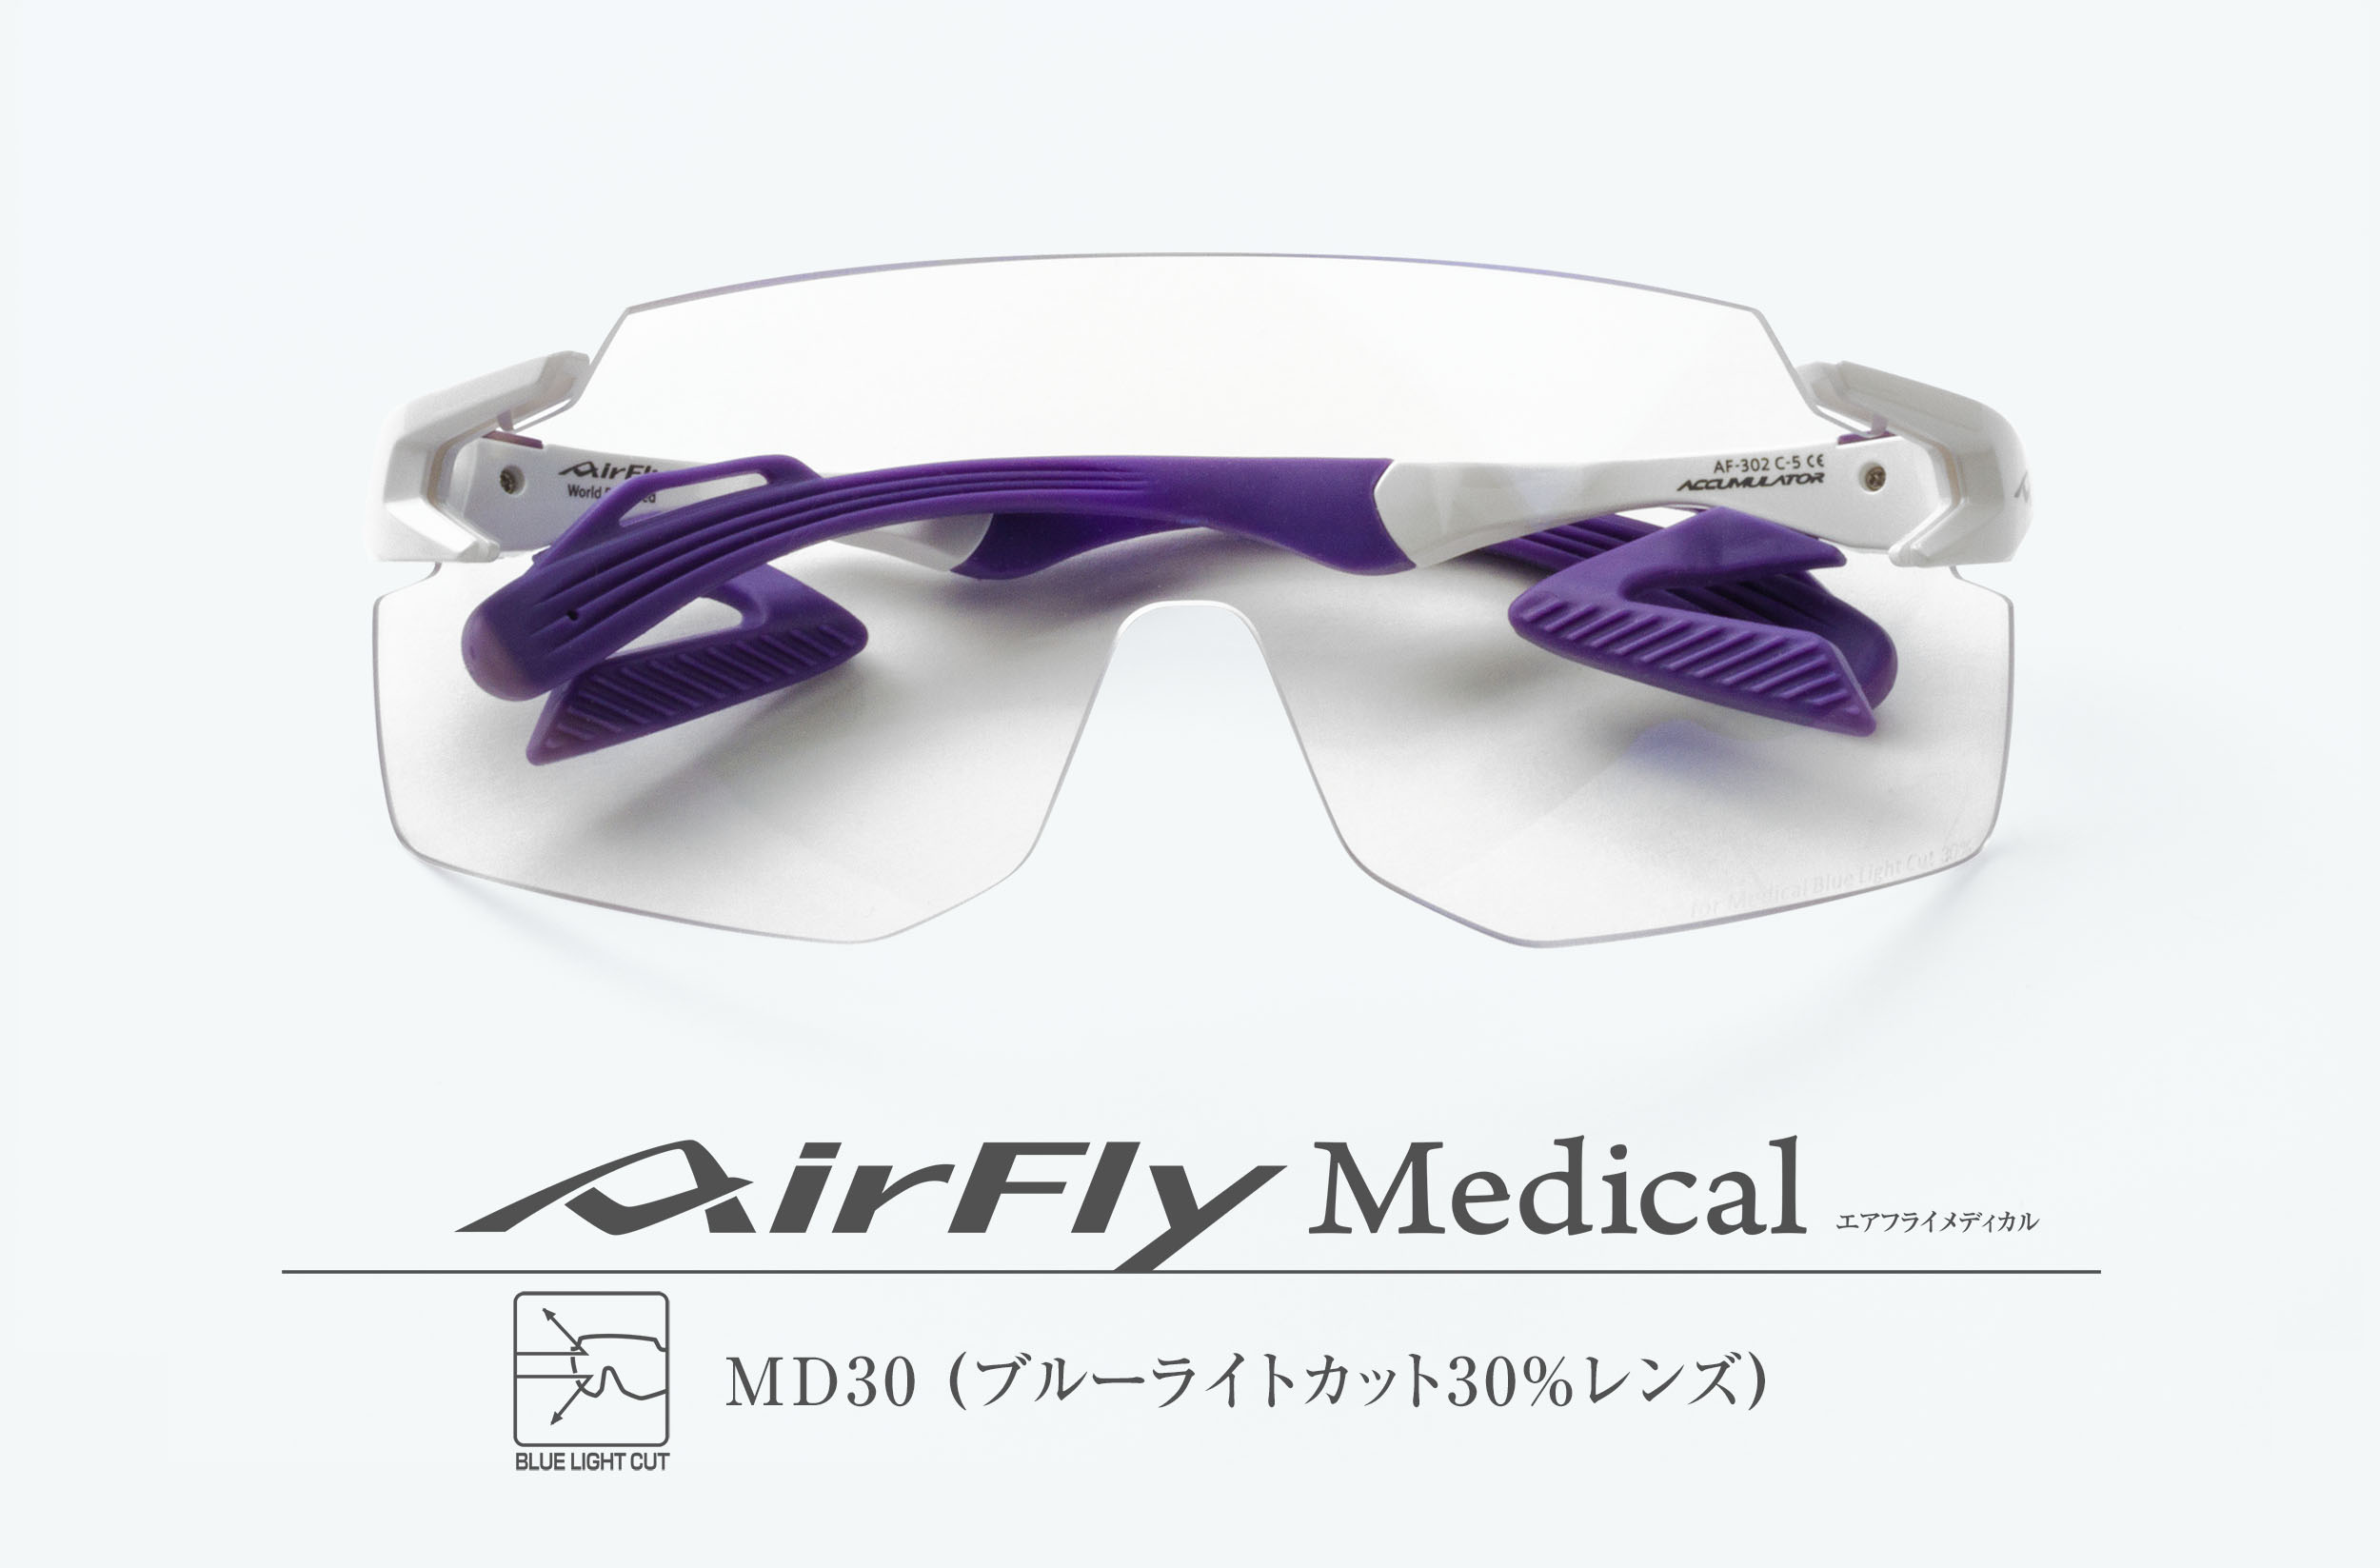 AirFly Medical MD30 Lens